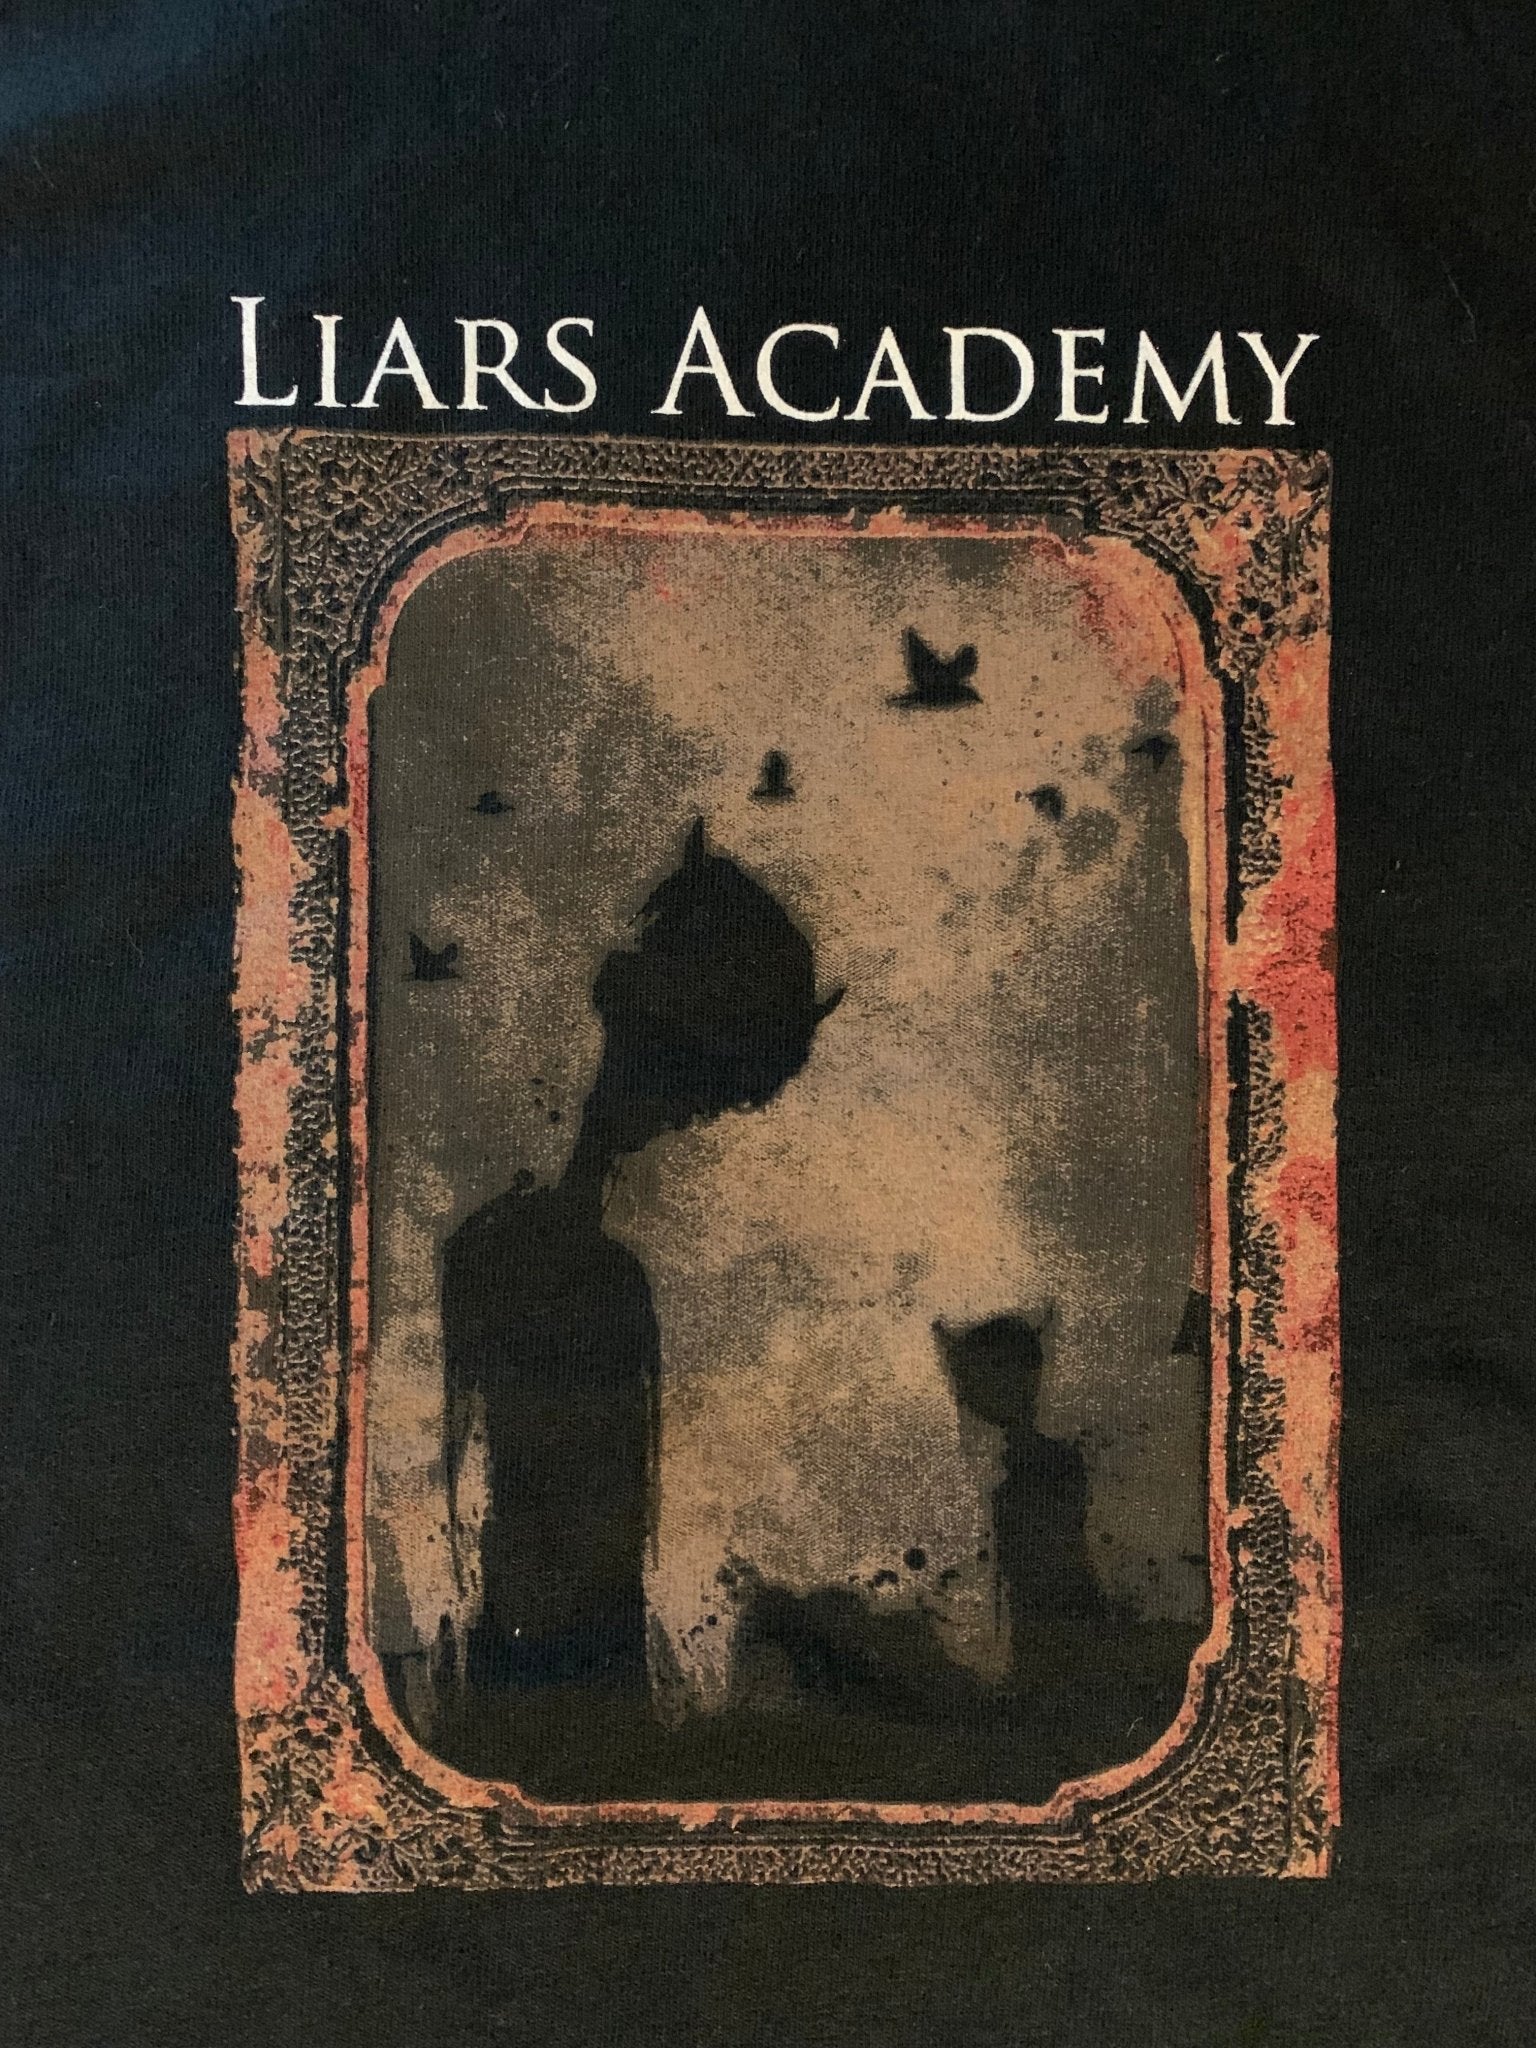 Liars Academy: Demons T-Shirt (S or M only) - Steadfast Records